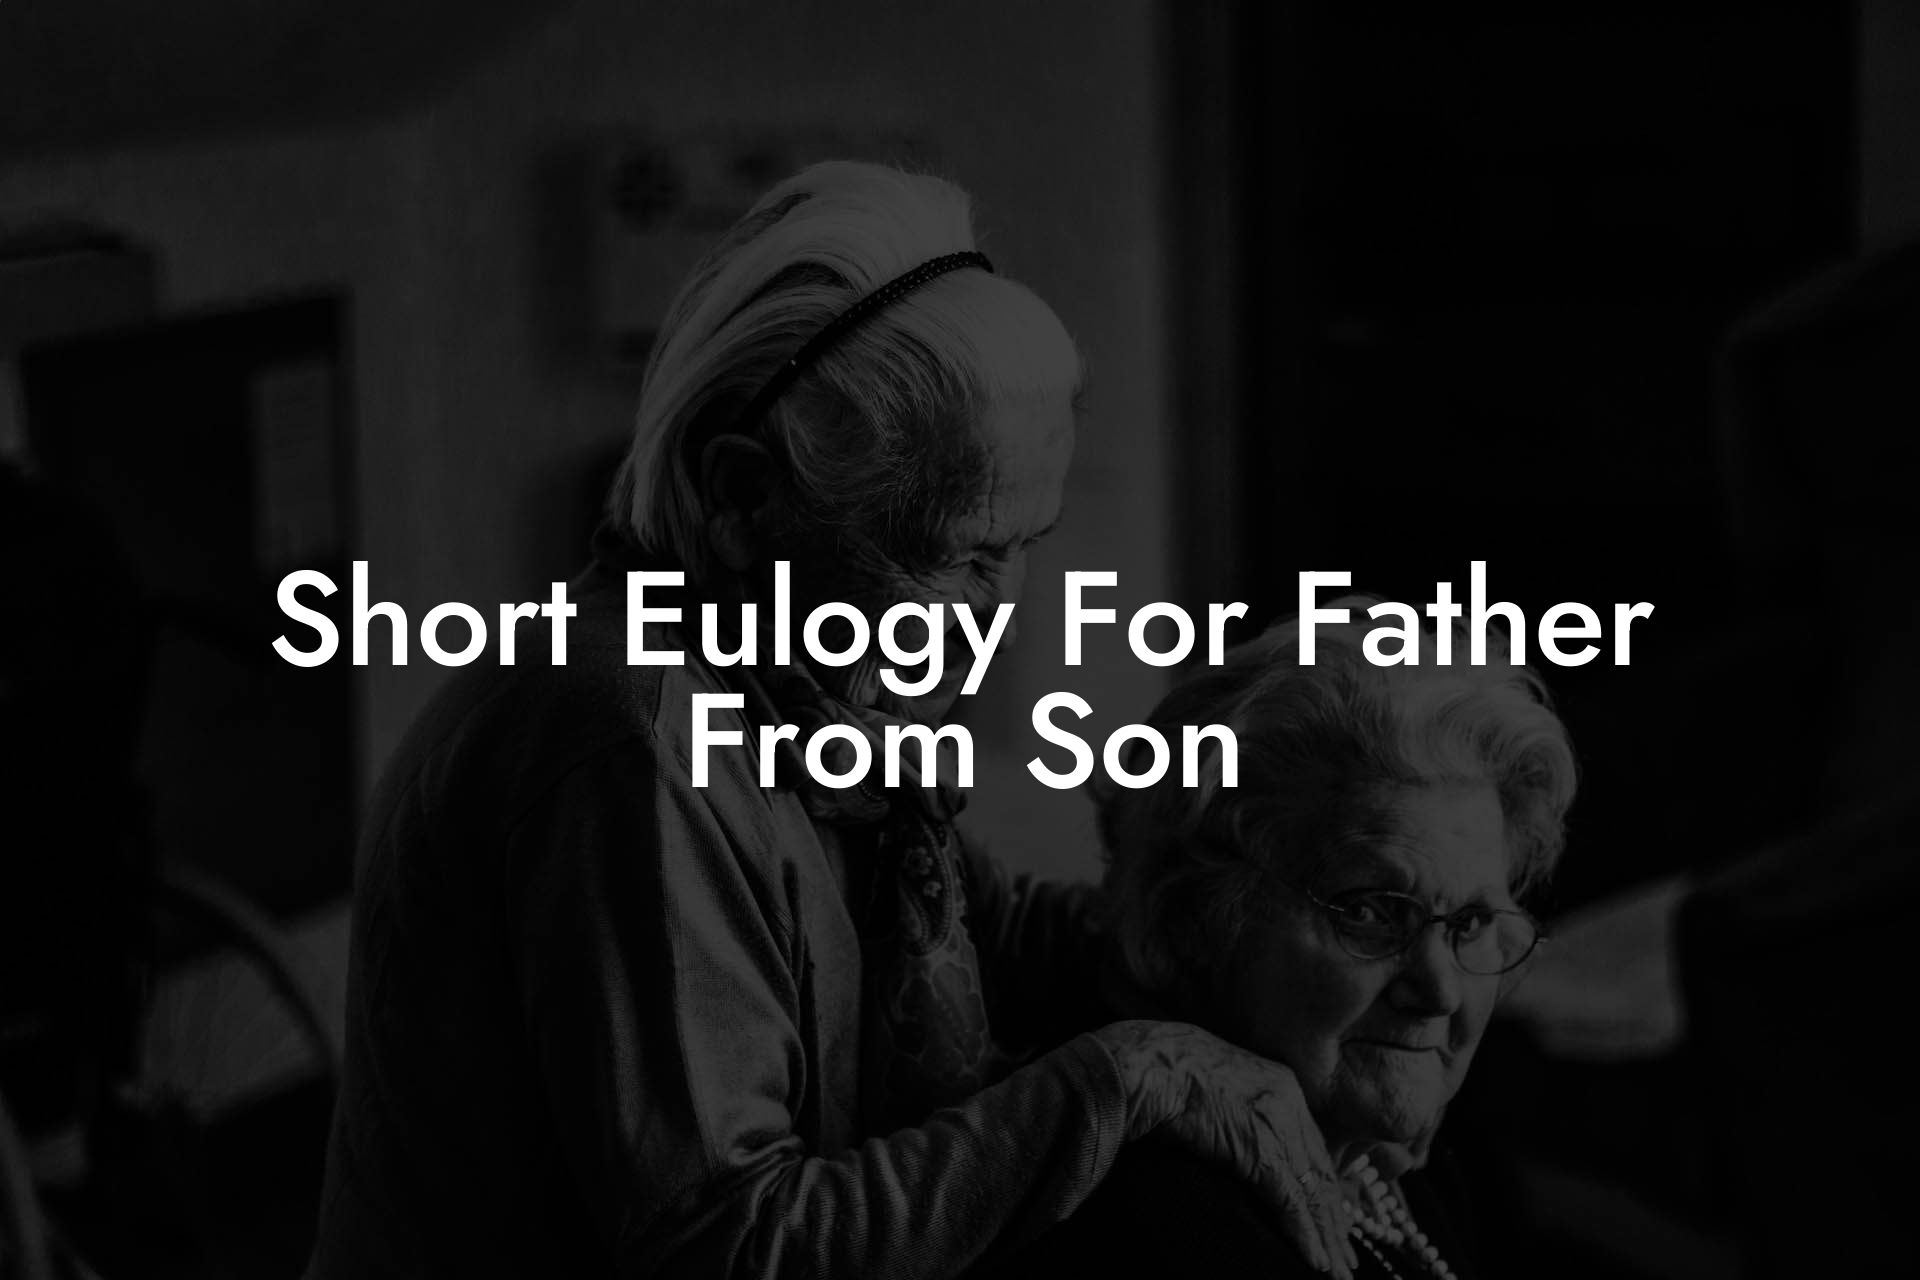 Short Eulogy For Father From Son